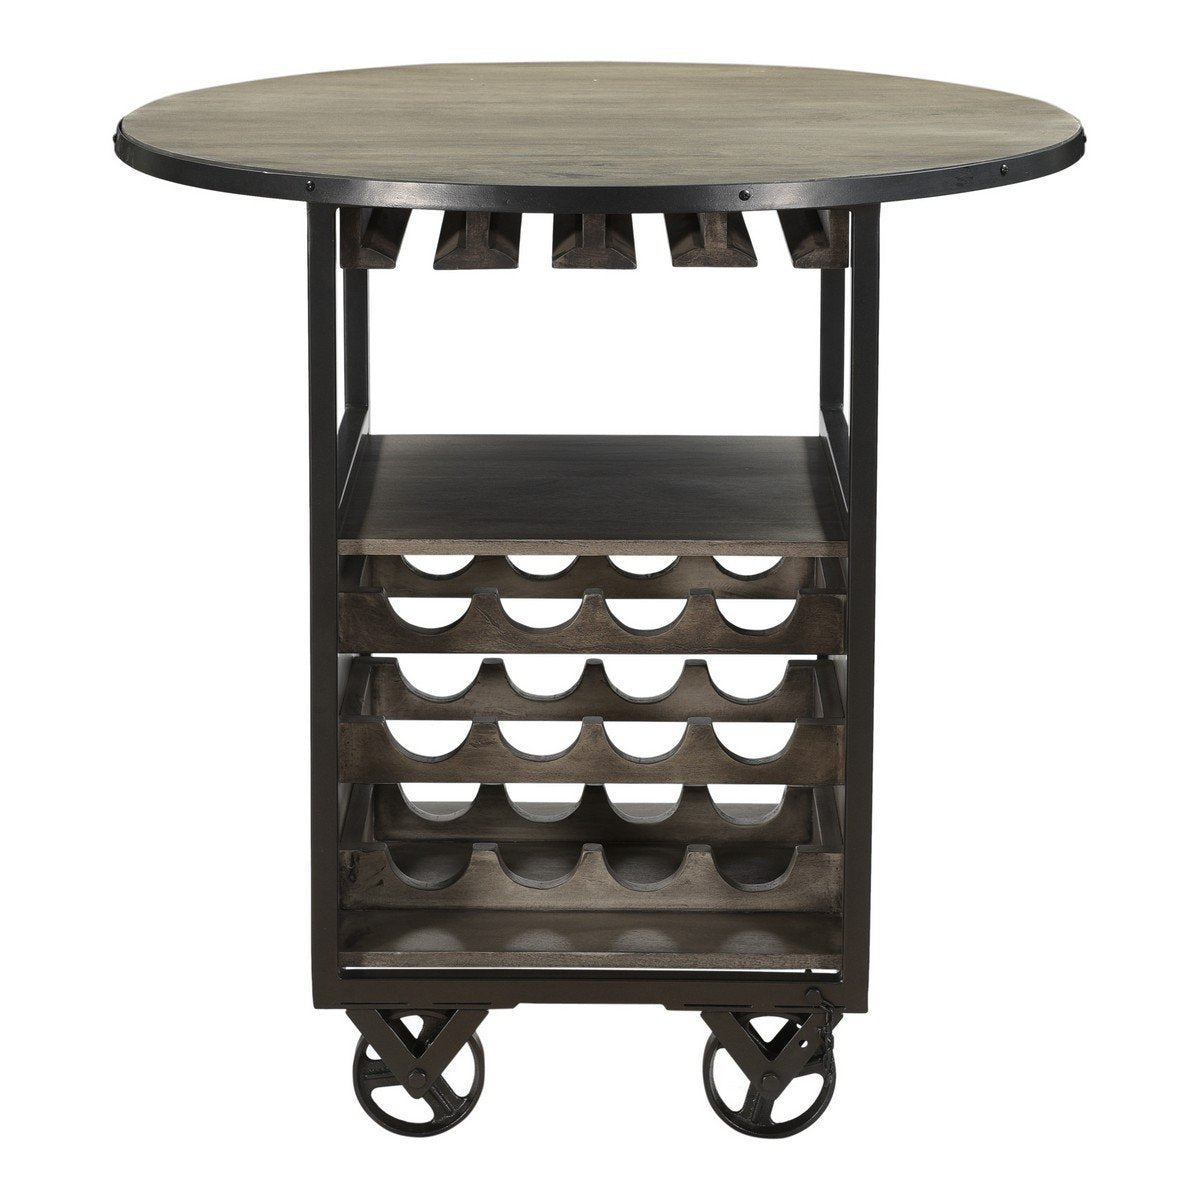 Moe's Home Collection Julep Bar Cart - BV-1017-41 - Moe's Home Collection - Extras - Minimal And Modern - 1